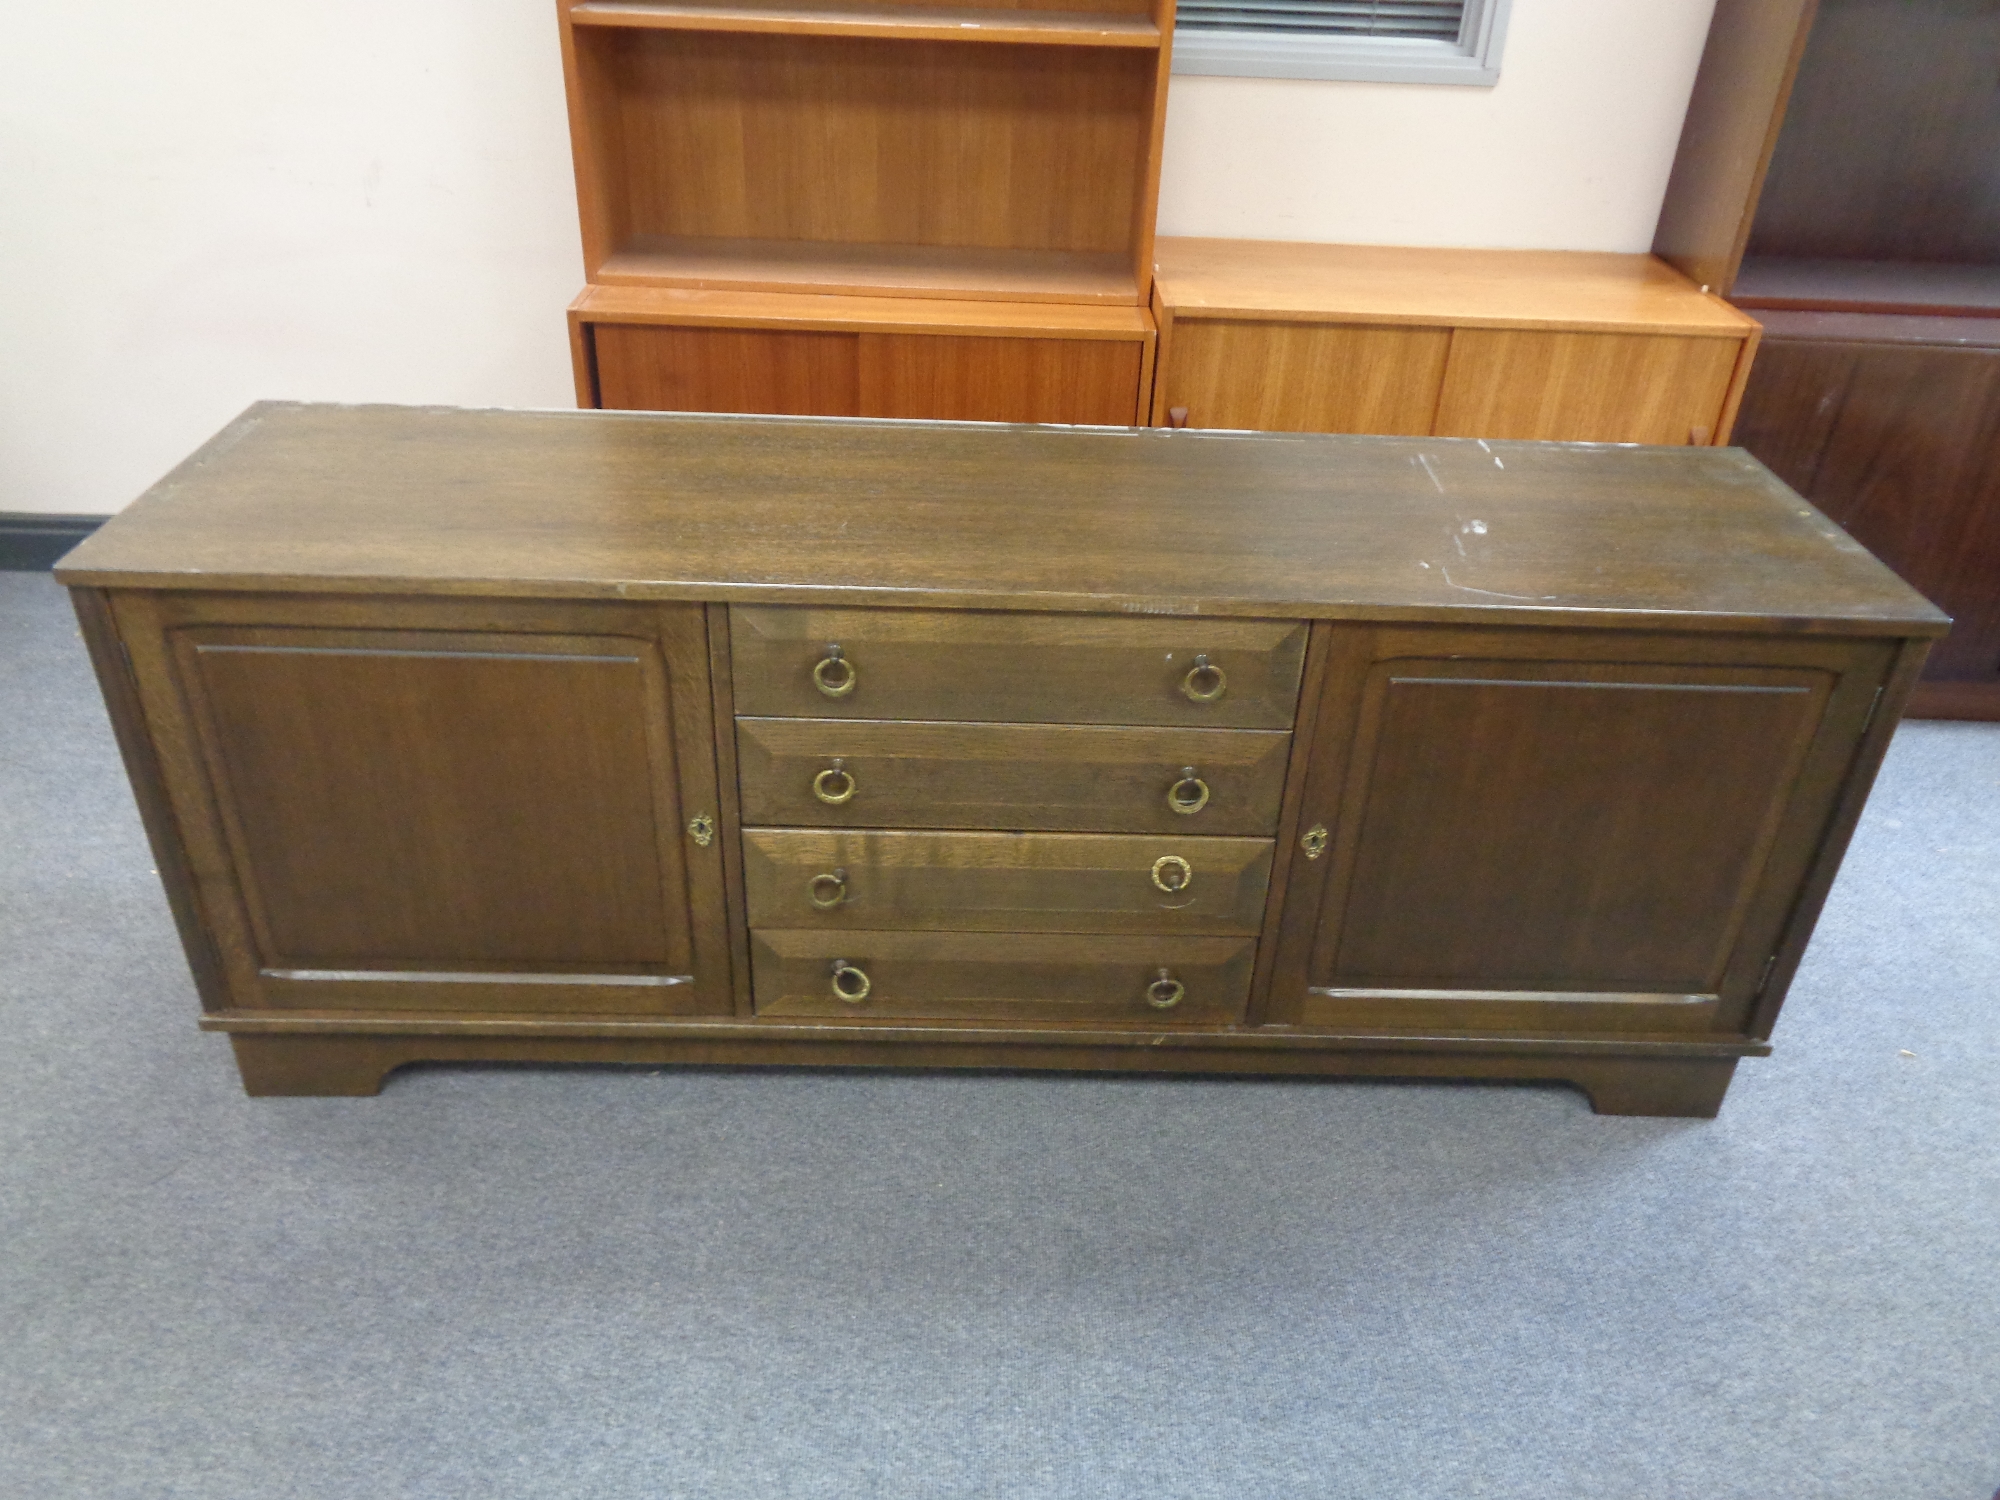 A double door low sideboard fitted four central drawers in an oak finish